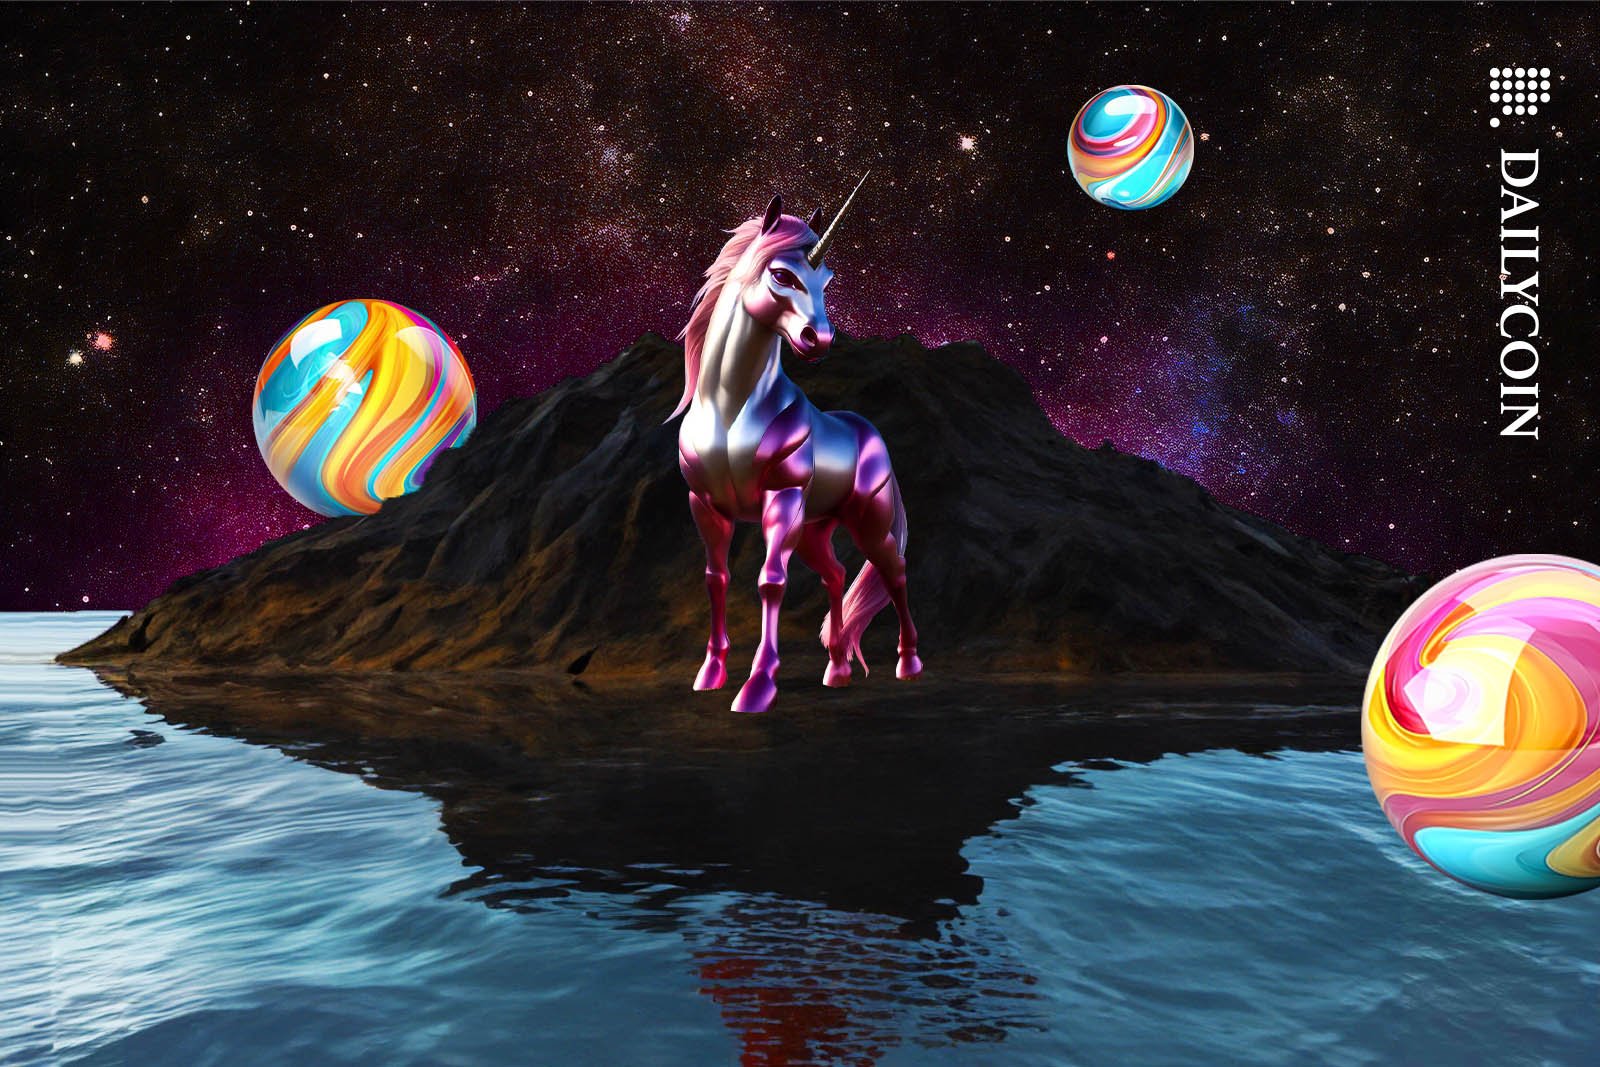 Pink Unicorn standing on Anon Island surrounded by colourful spheres.